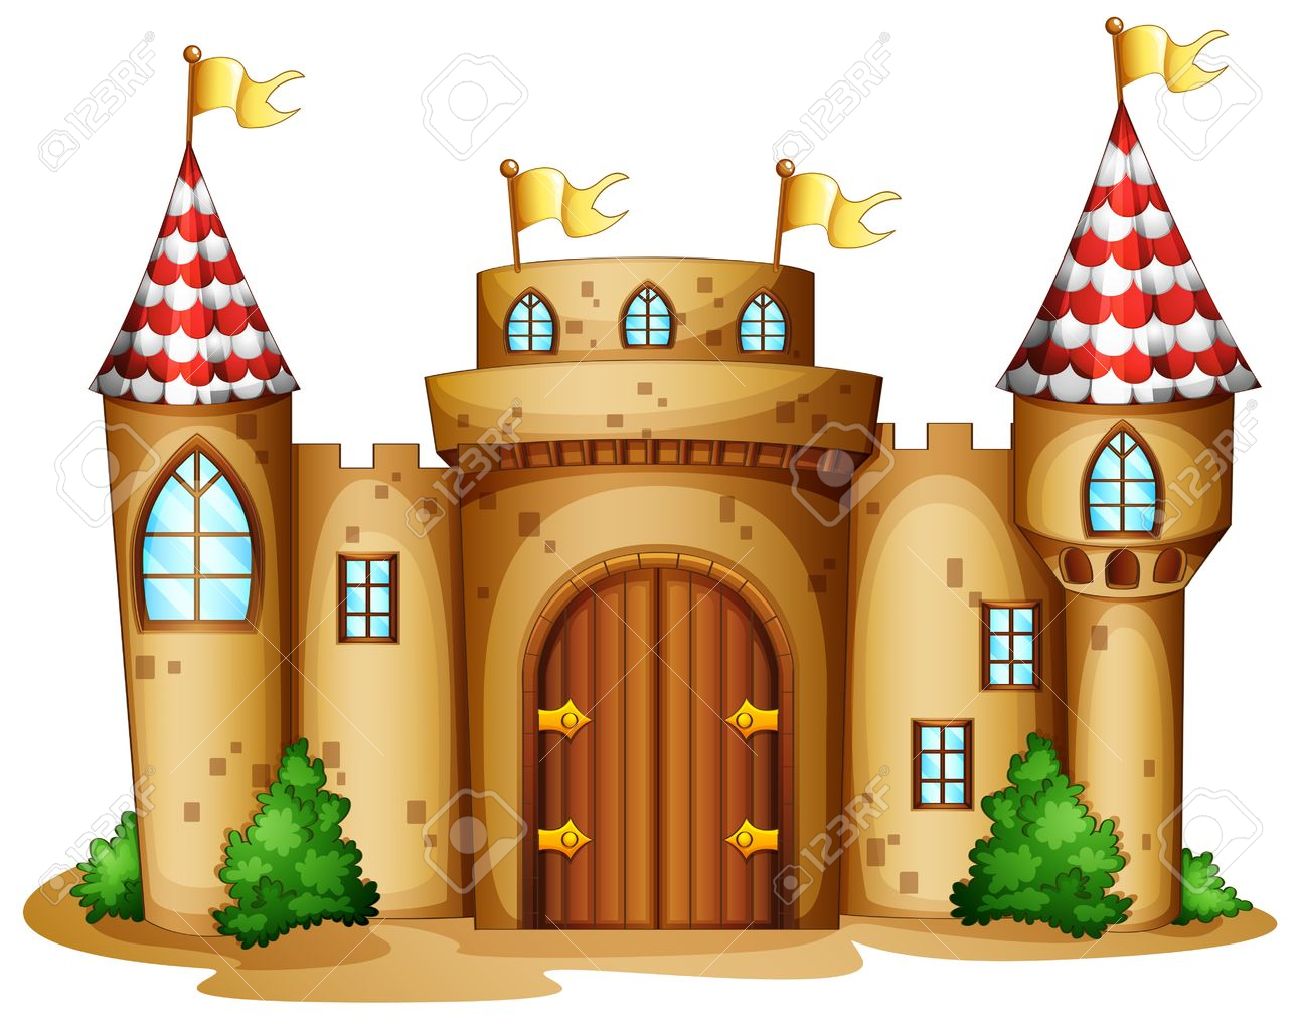 Royal Castle Stock Photos & Pictures. Royalty Free Royal Castle.